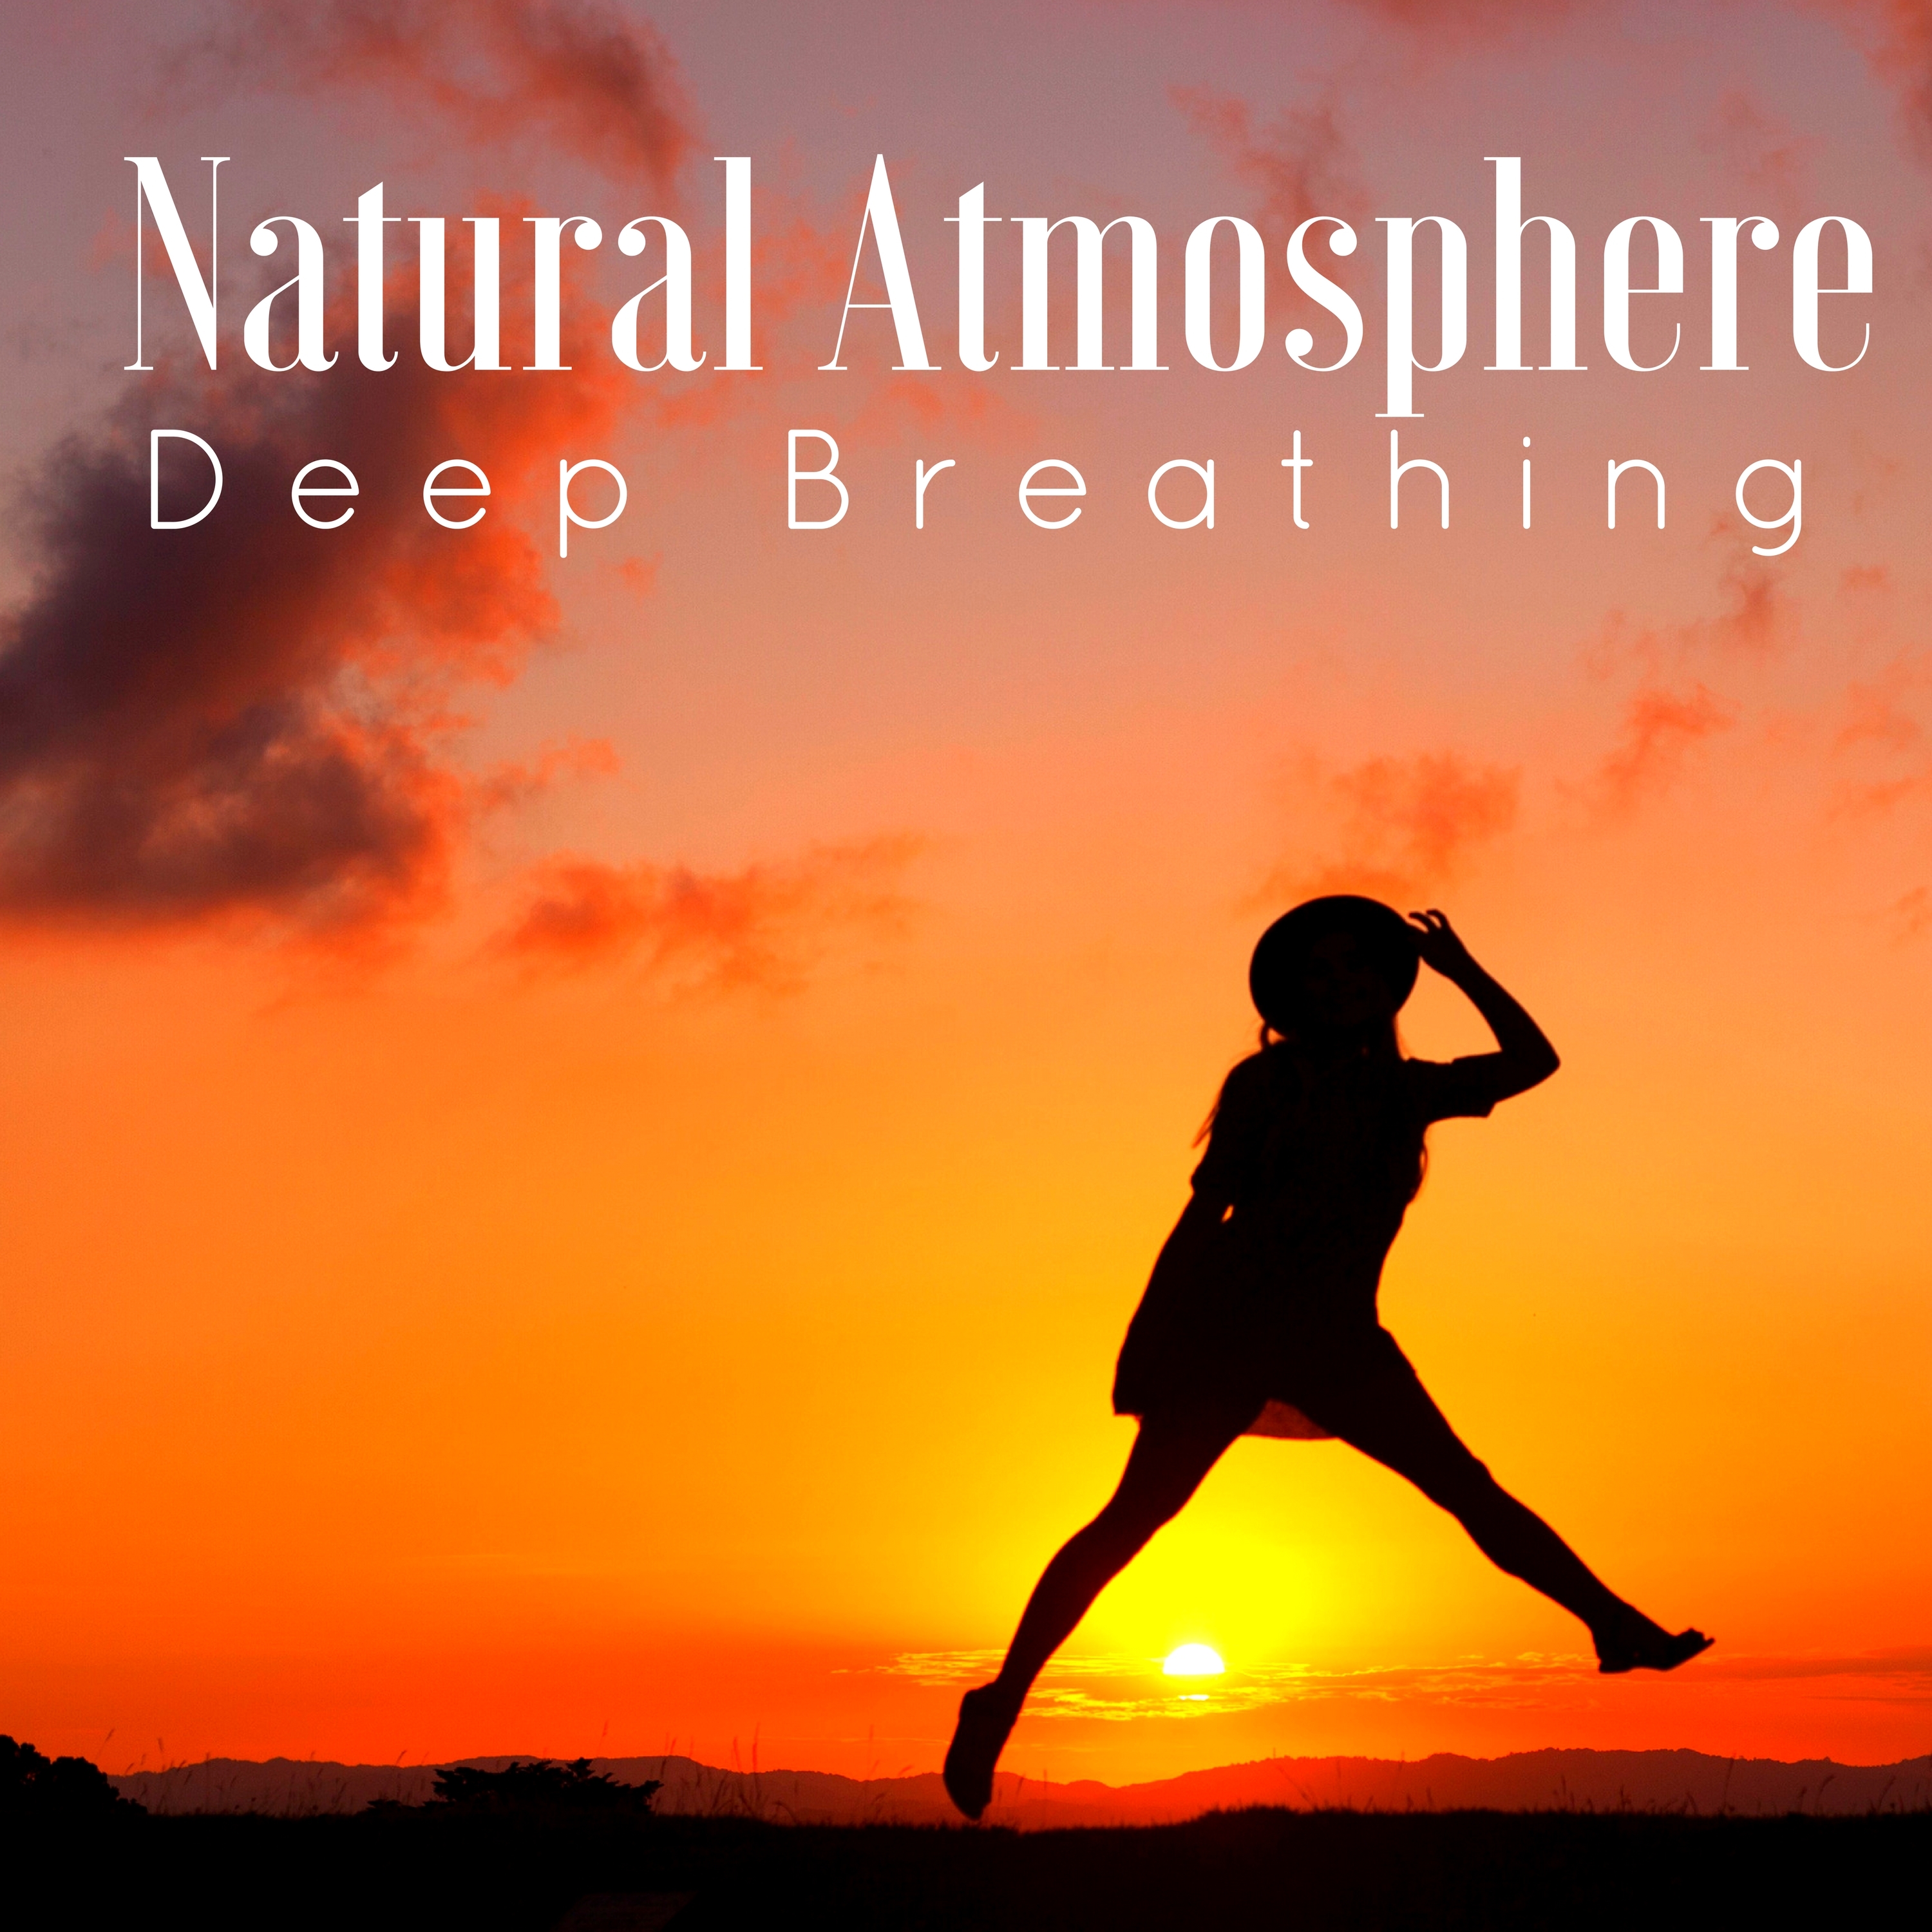 Natural Atmosphere - Yoga Training Meditation Music for Yoga Moments, Inner Peace, Deep Breathing